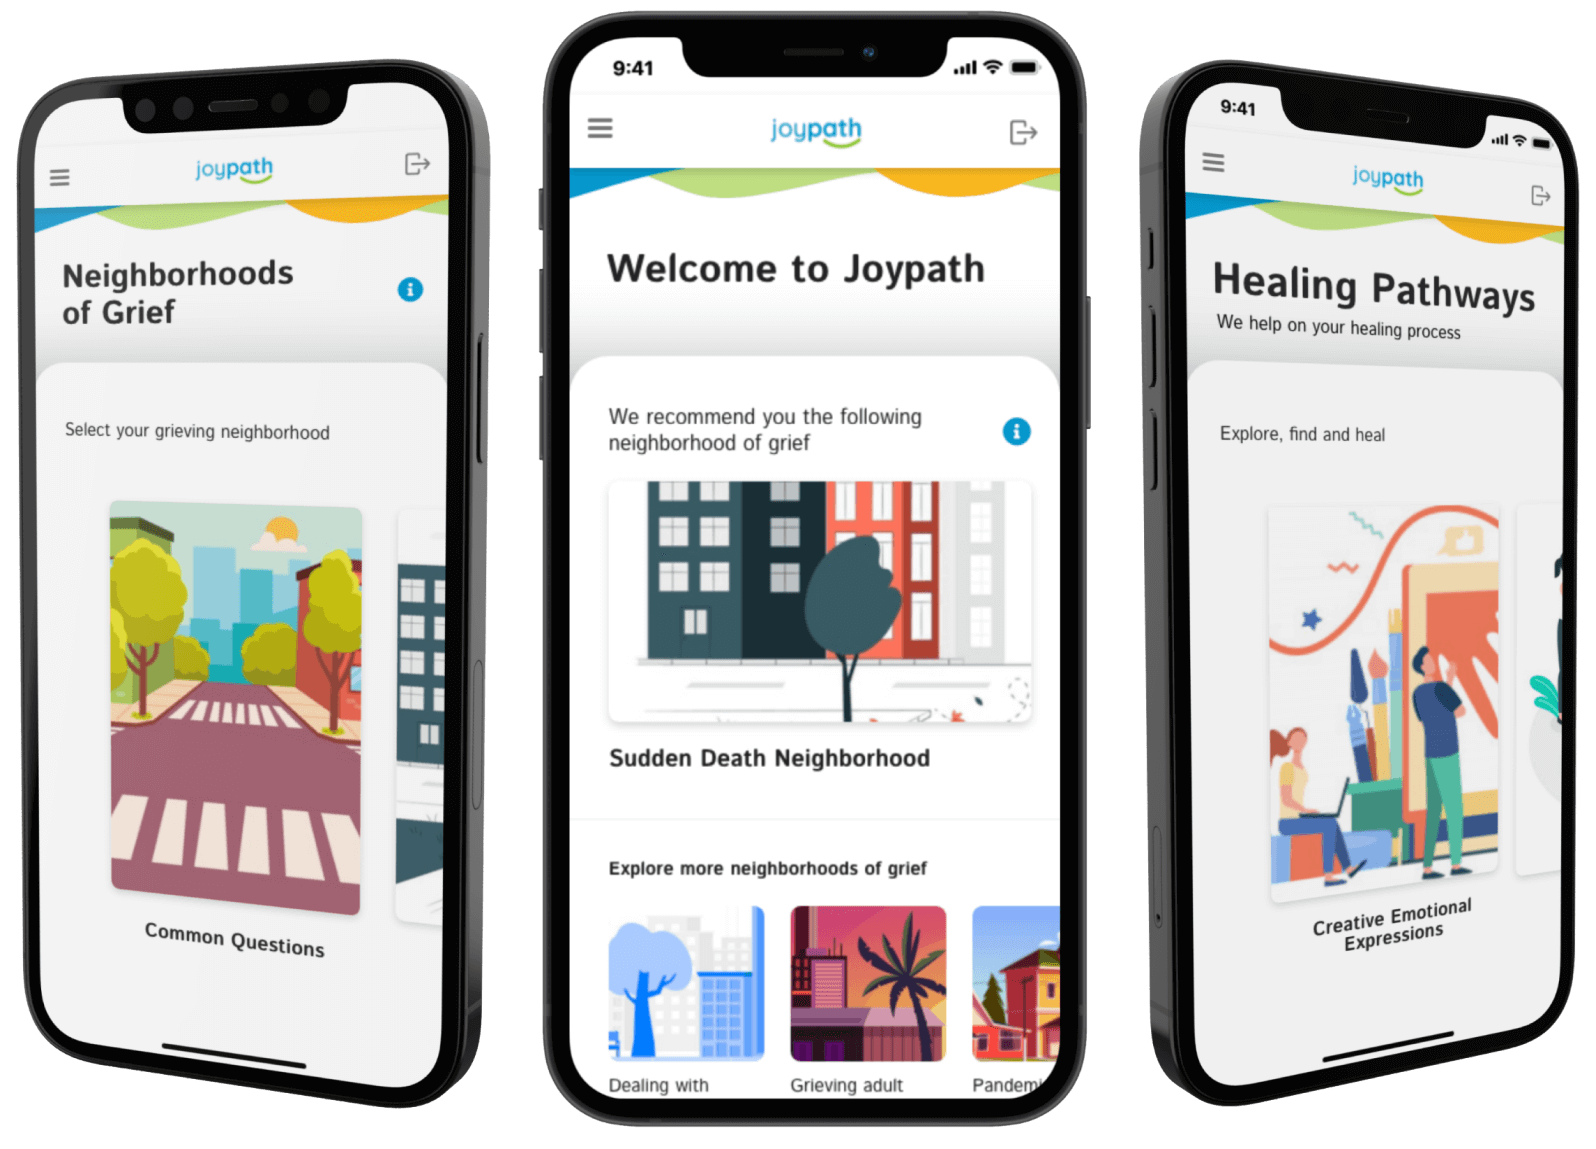 Three smartphones show screens with the headings: “Neighborhood of grief”, “Welcome to Joypath”, and “Healing Pathways”.